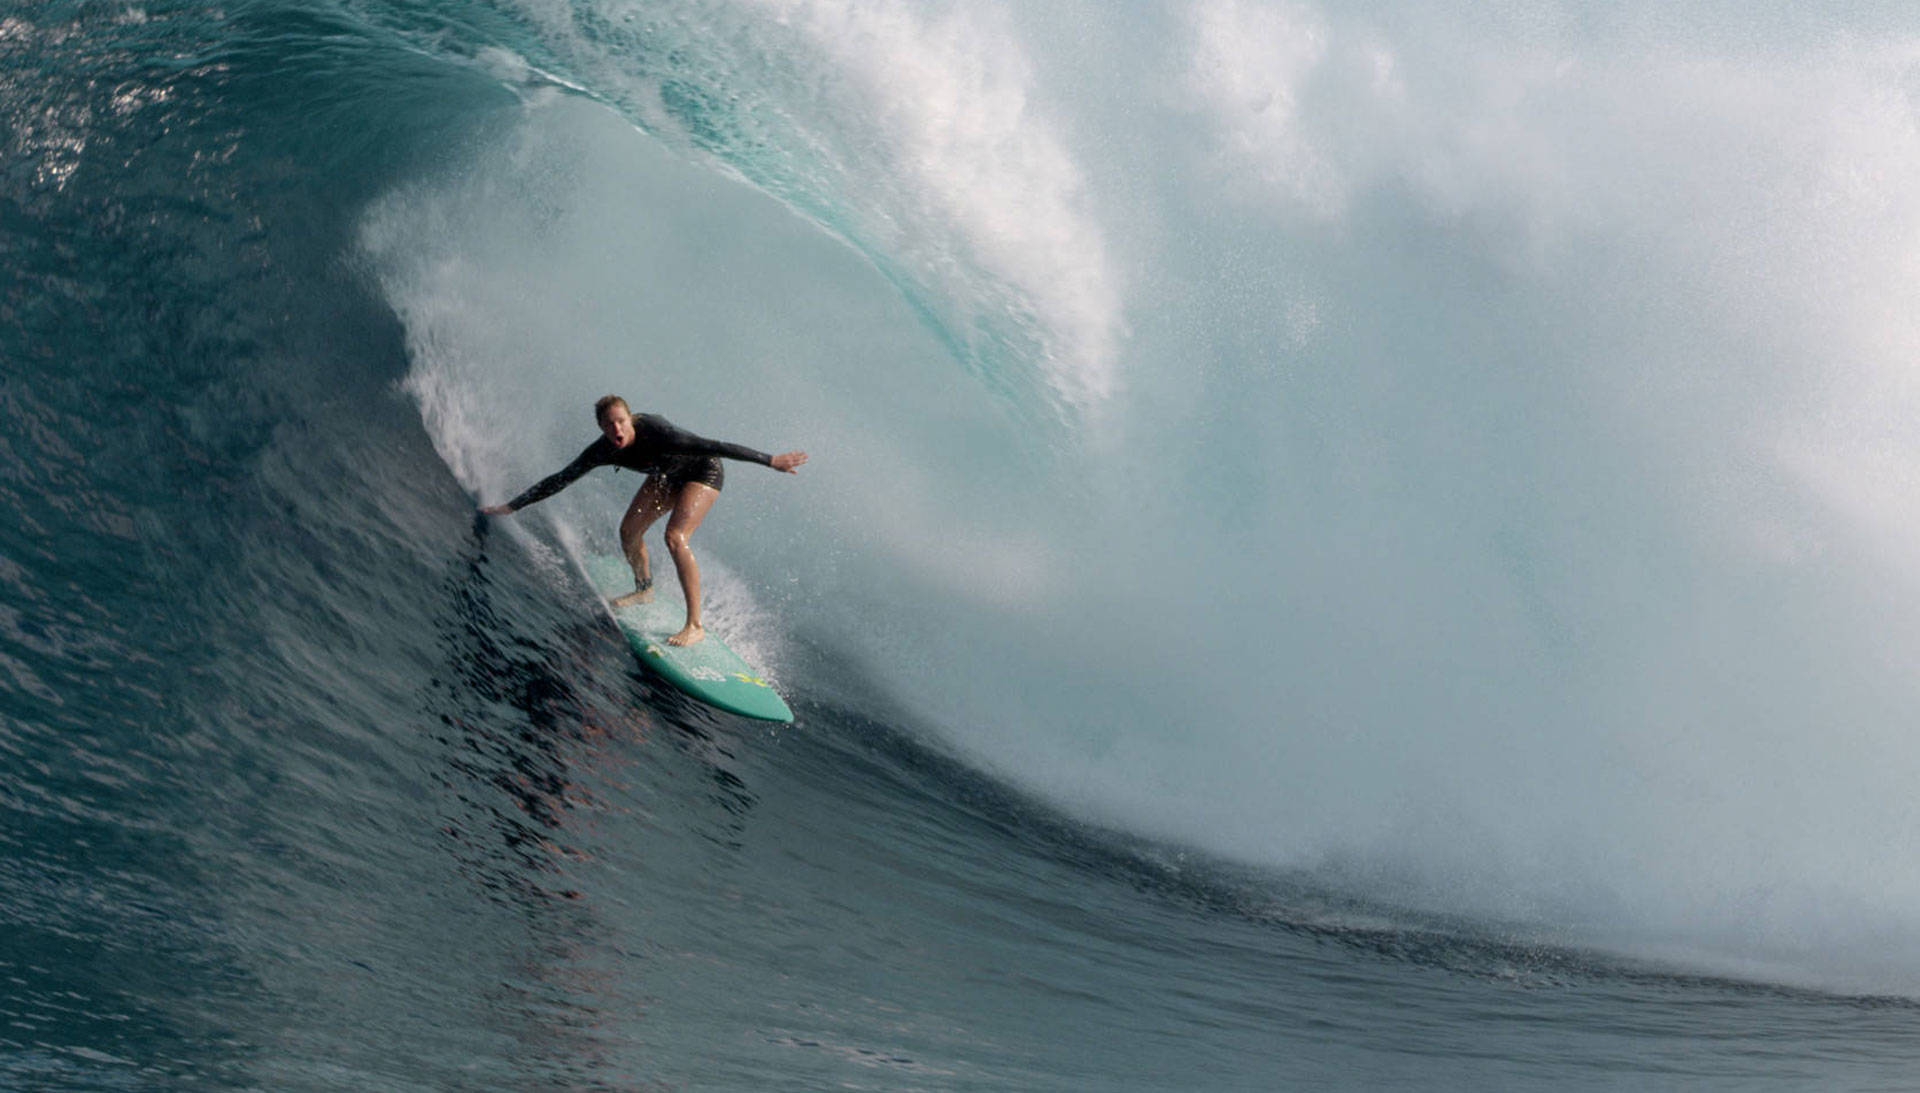 Paige Alms gets barreled at the Jaws surf break in Maui, Hawaii, a clip featured in the documentary 'The Wave I Ride.'  Courtesy of 'The Wave I Ride'